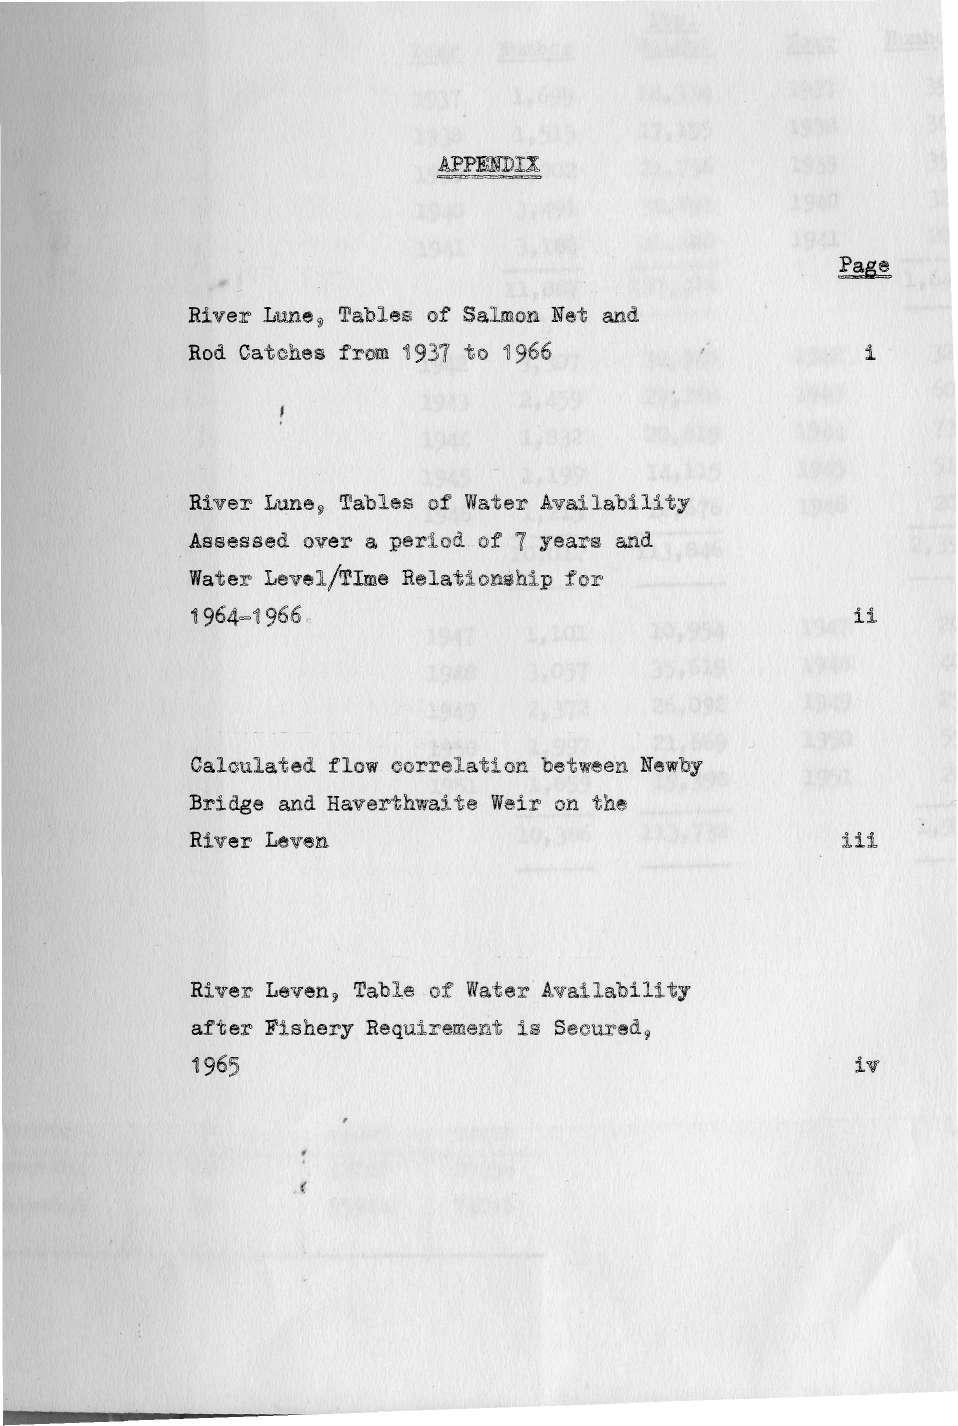 APPENDIX Rive Lune, Tables of Salmon let and Page Hod Catches from 1937 to 1966 1 River3Lune,Tables of Water Availability Assessed oyer a period of 7 years and Water Level/Time Relationship for